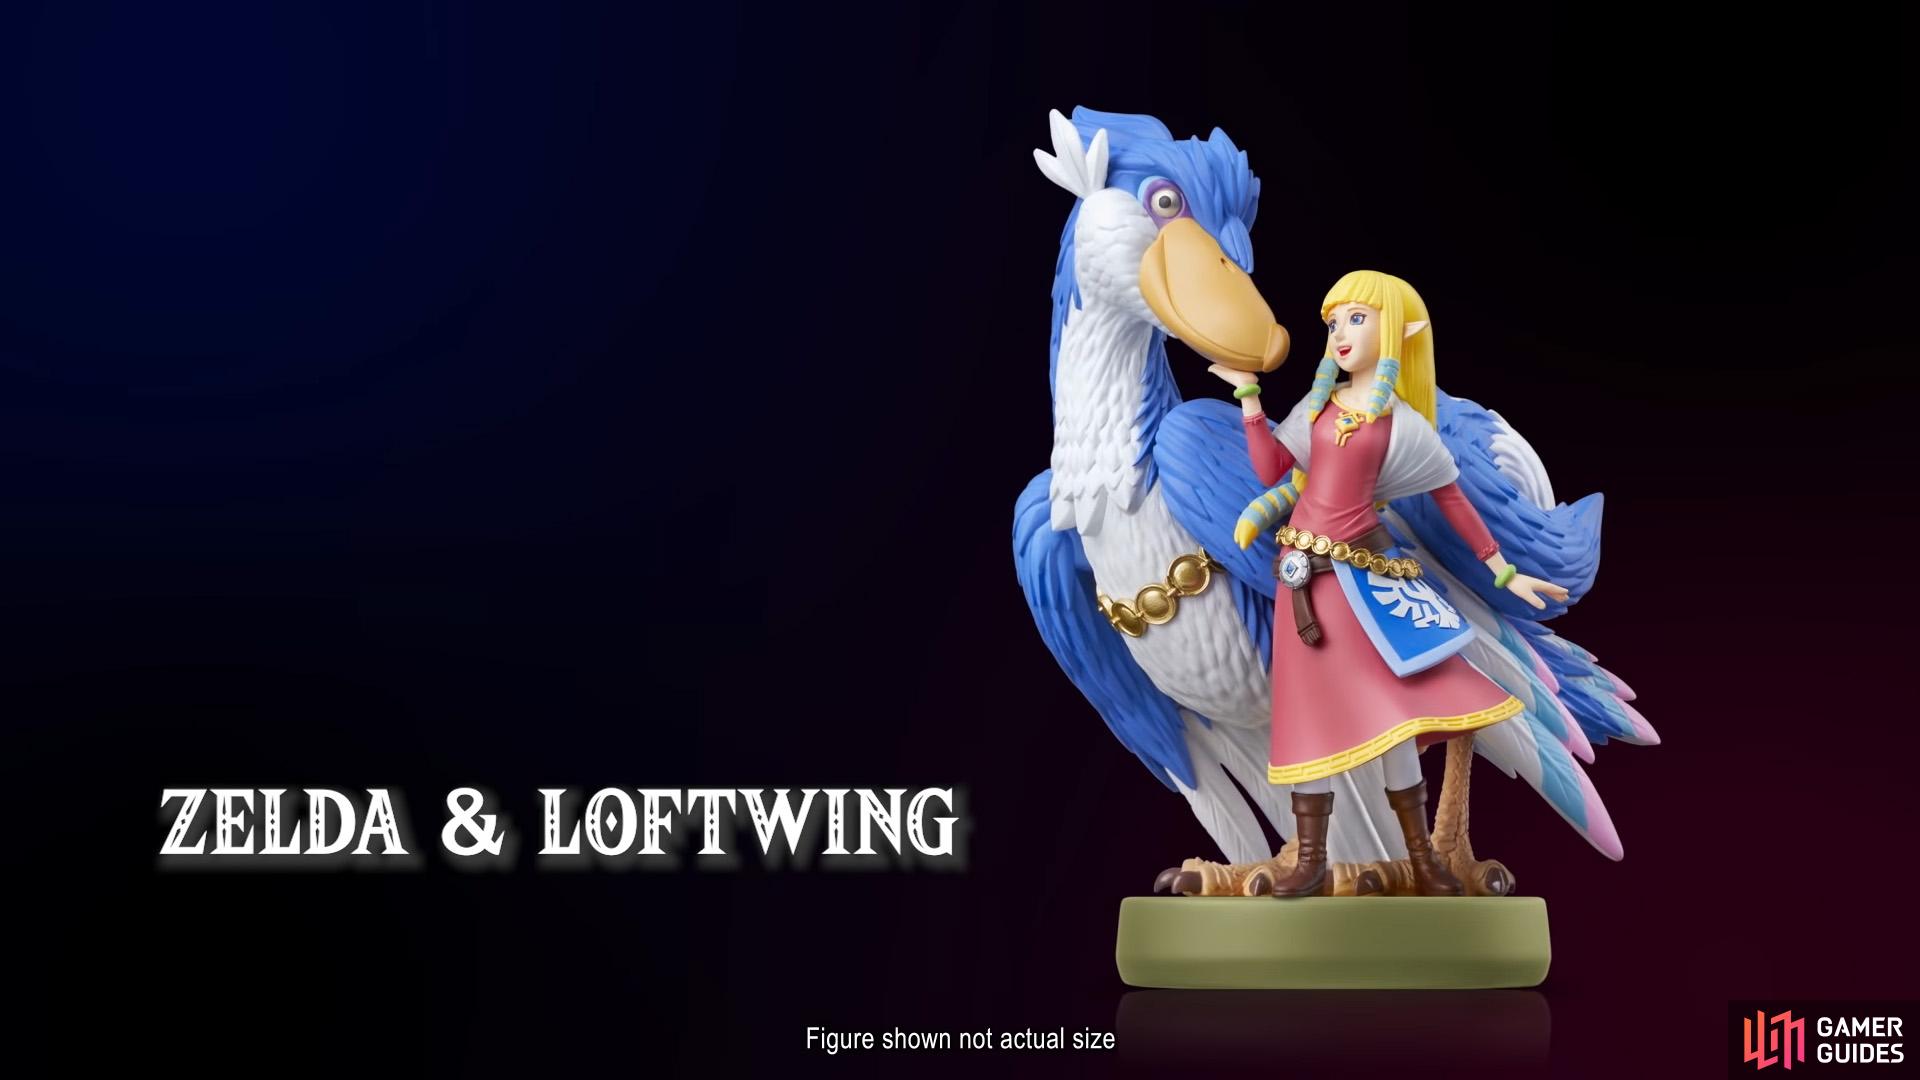 The Zelda and Loftwing amiibo is very cool, but locking a gameplay feature behind it is kind of…